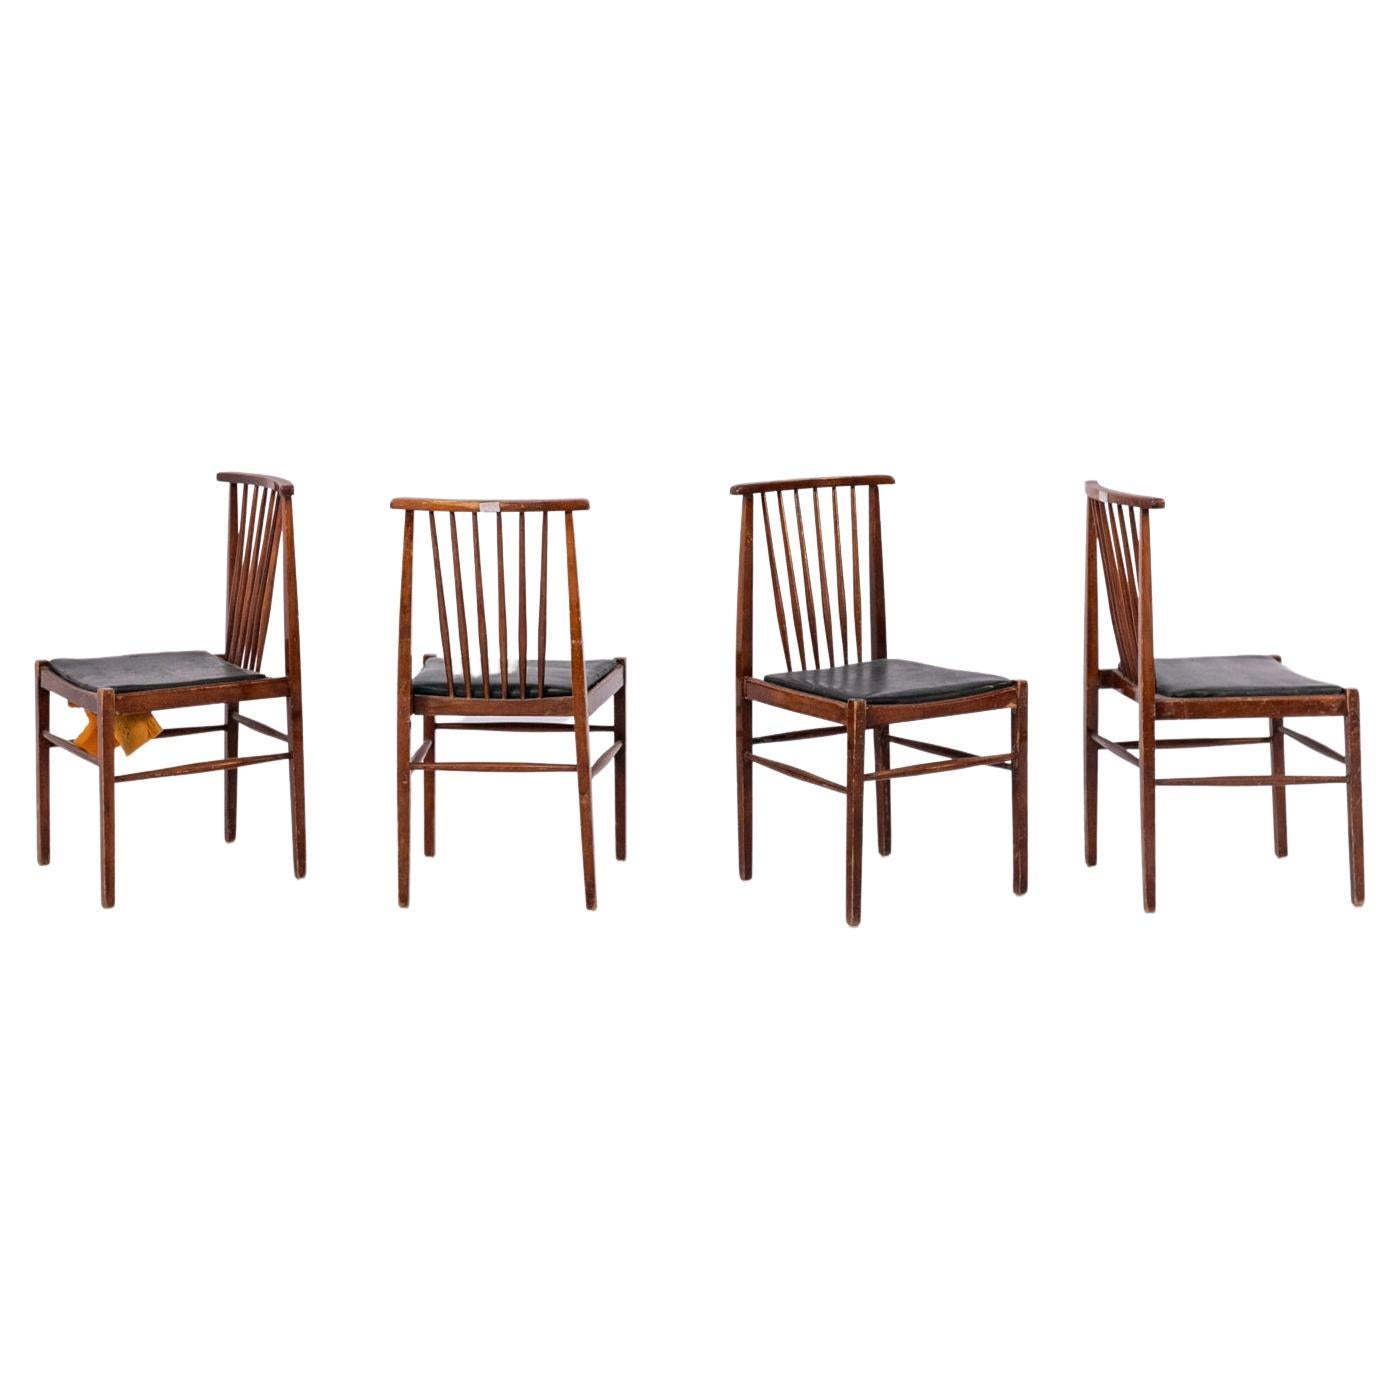 Set of Vintage American Leather and Wood Chairs